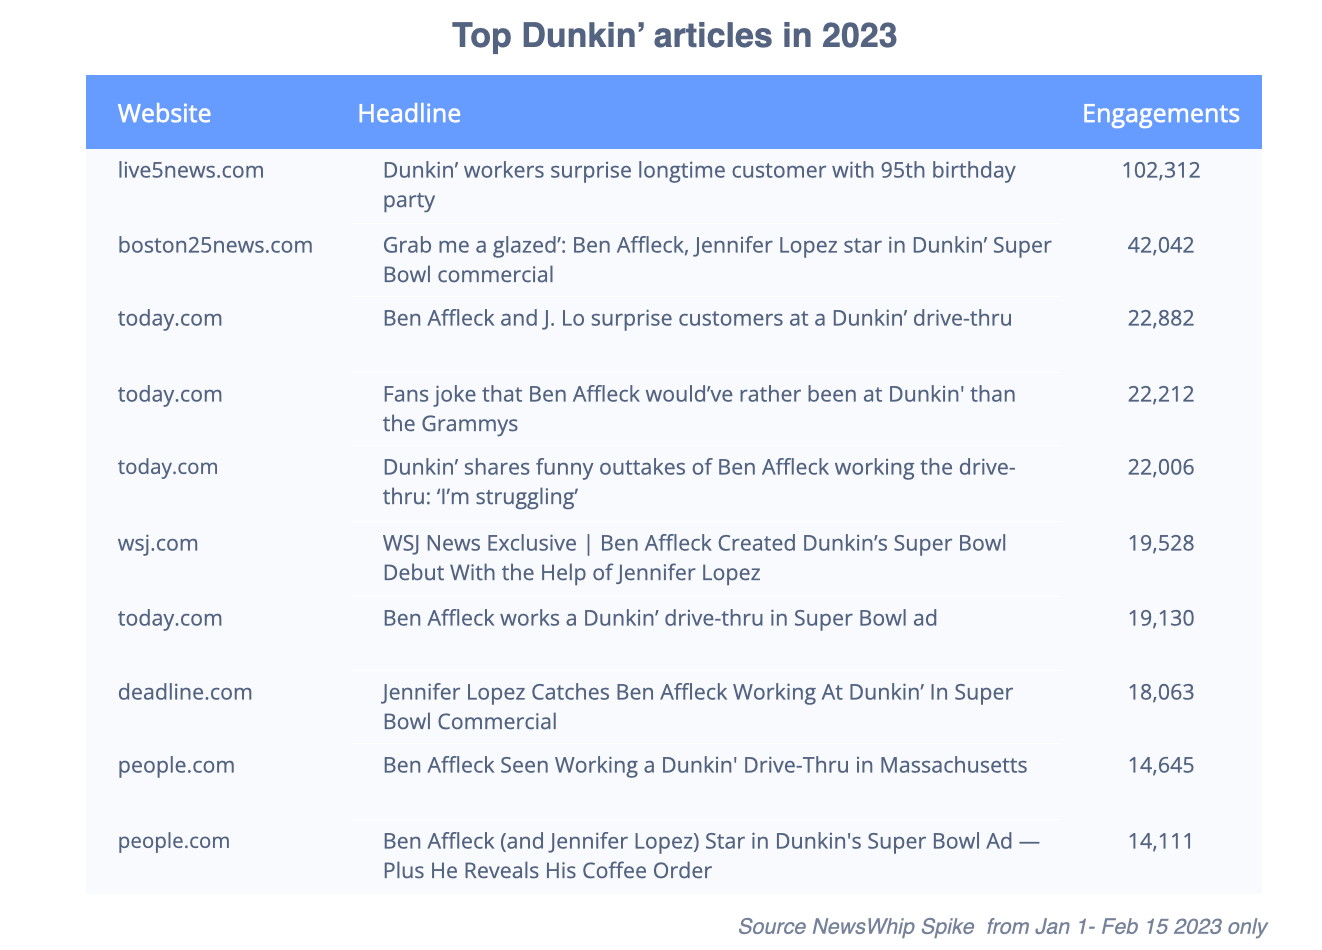 Chart showing the top ten articles about Dunkin in 2023, ranked by engagement